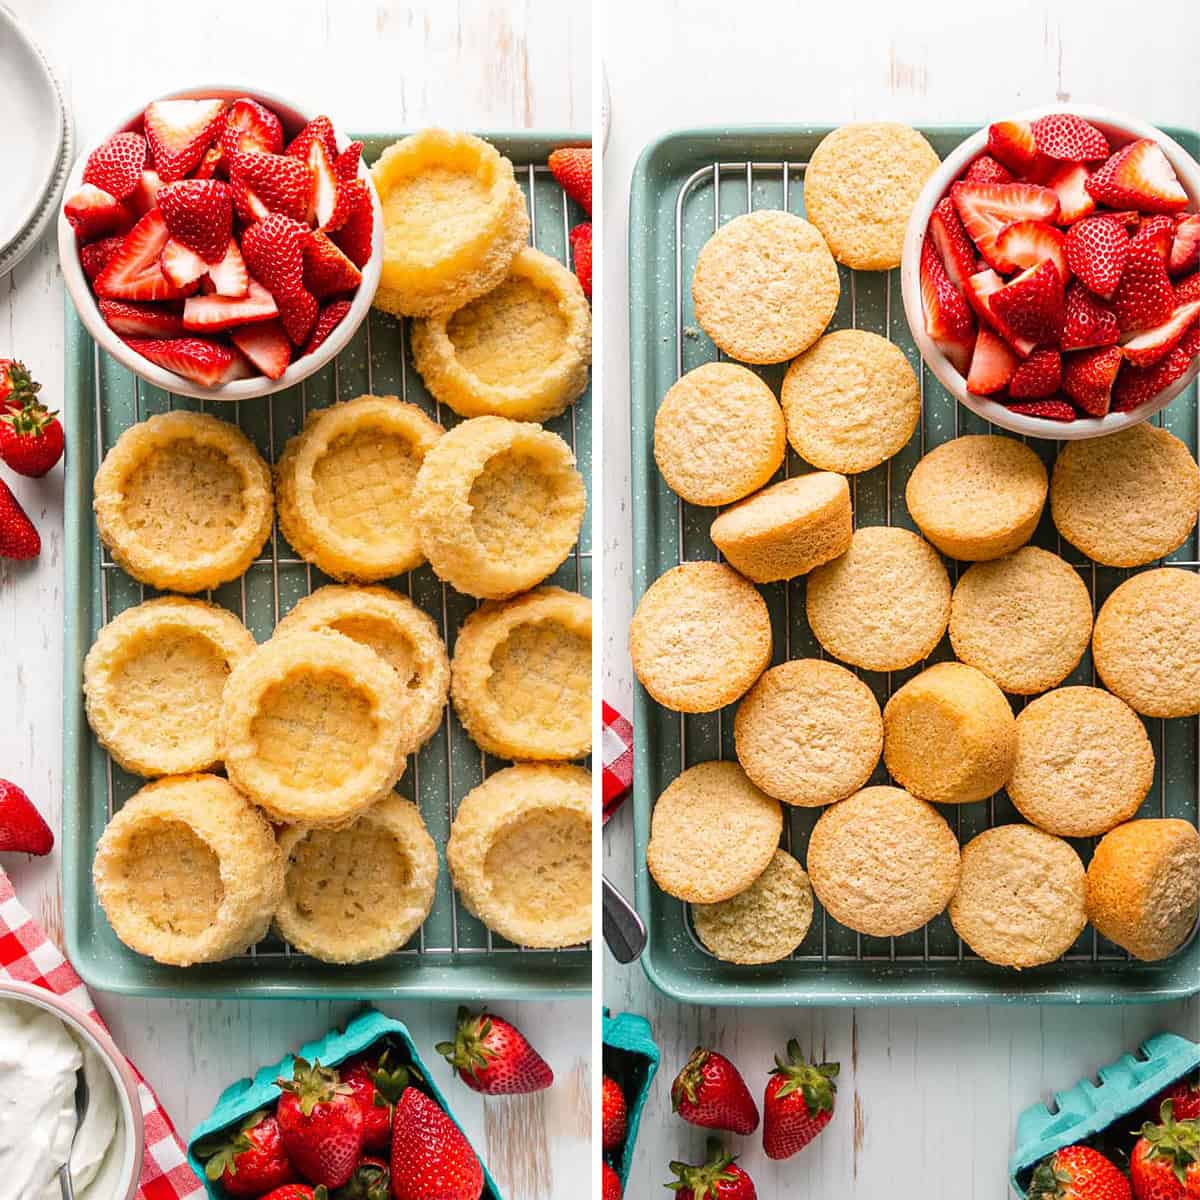 A blue speckled pan full of dessert shells and a pan full of cupcakes flanked by bowls of strawberries.